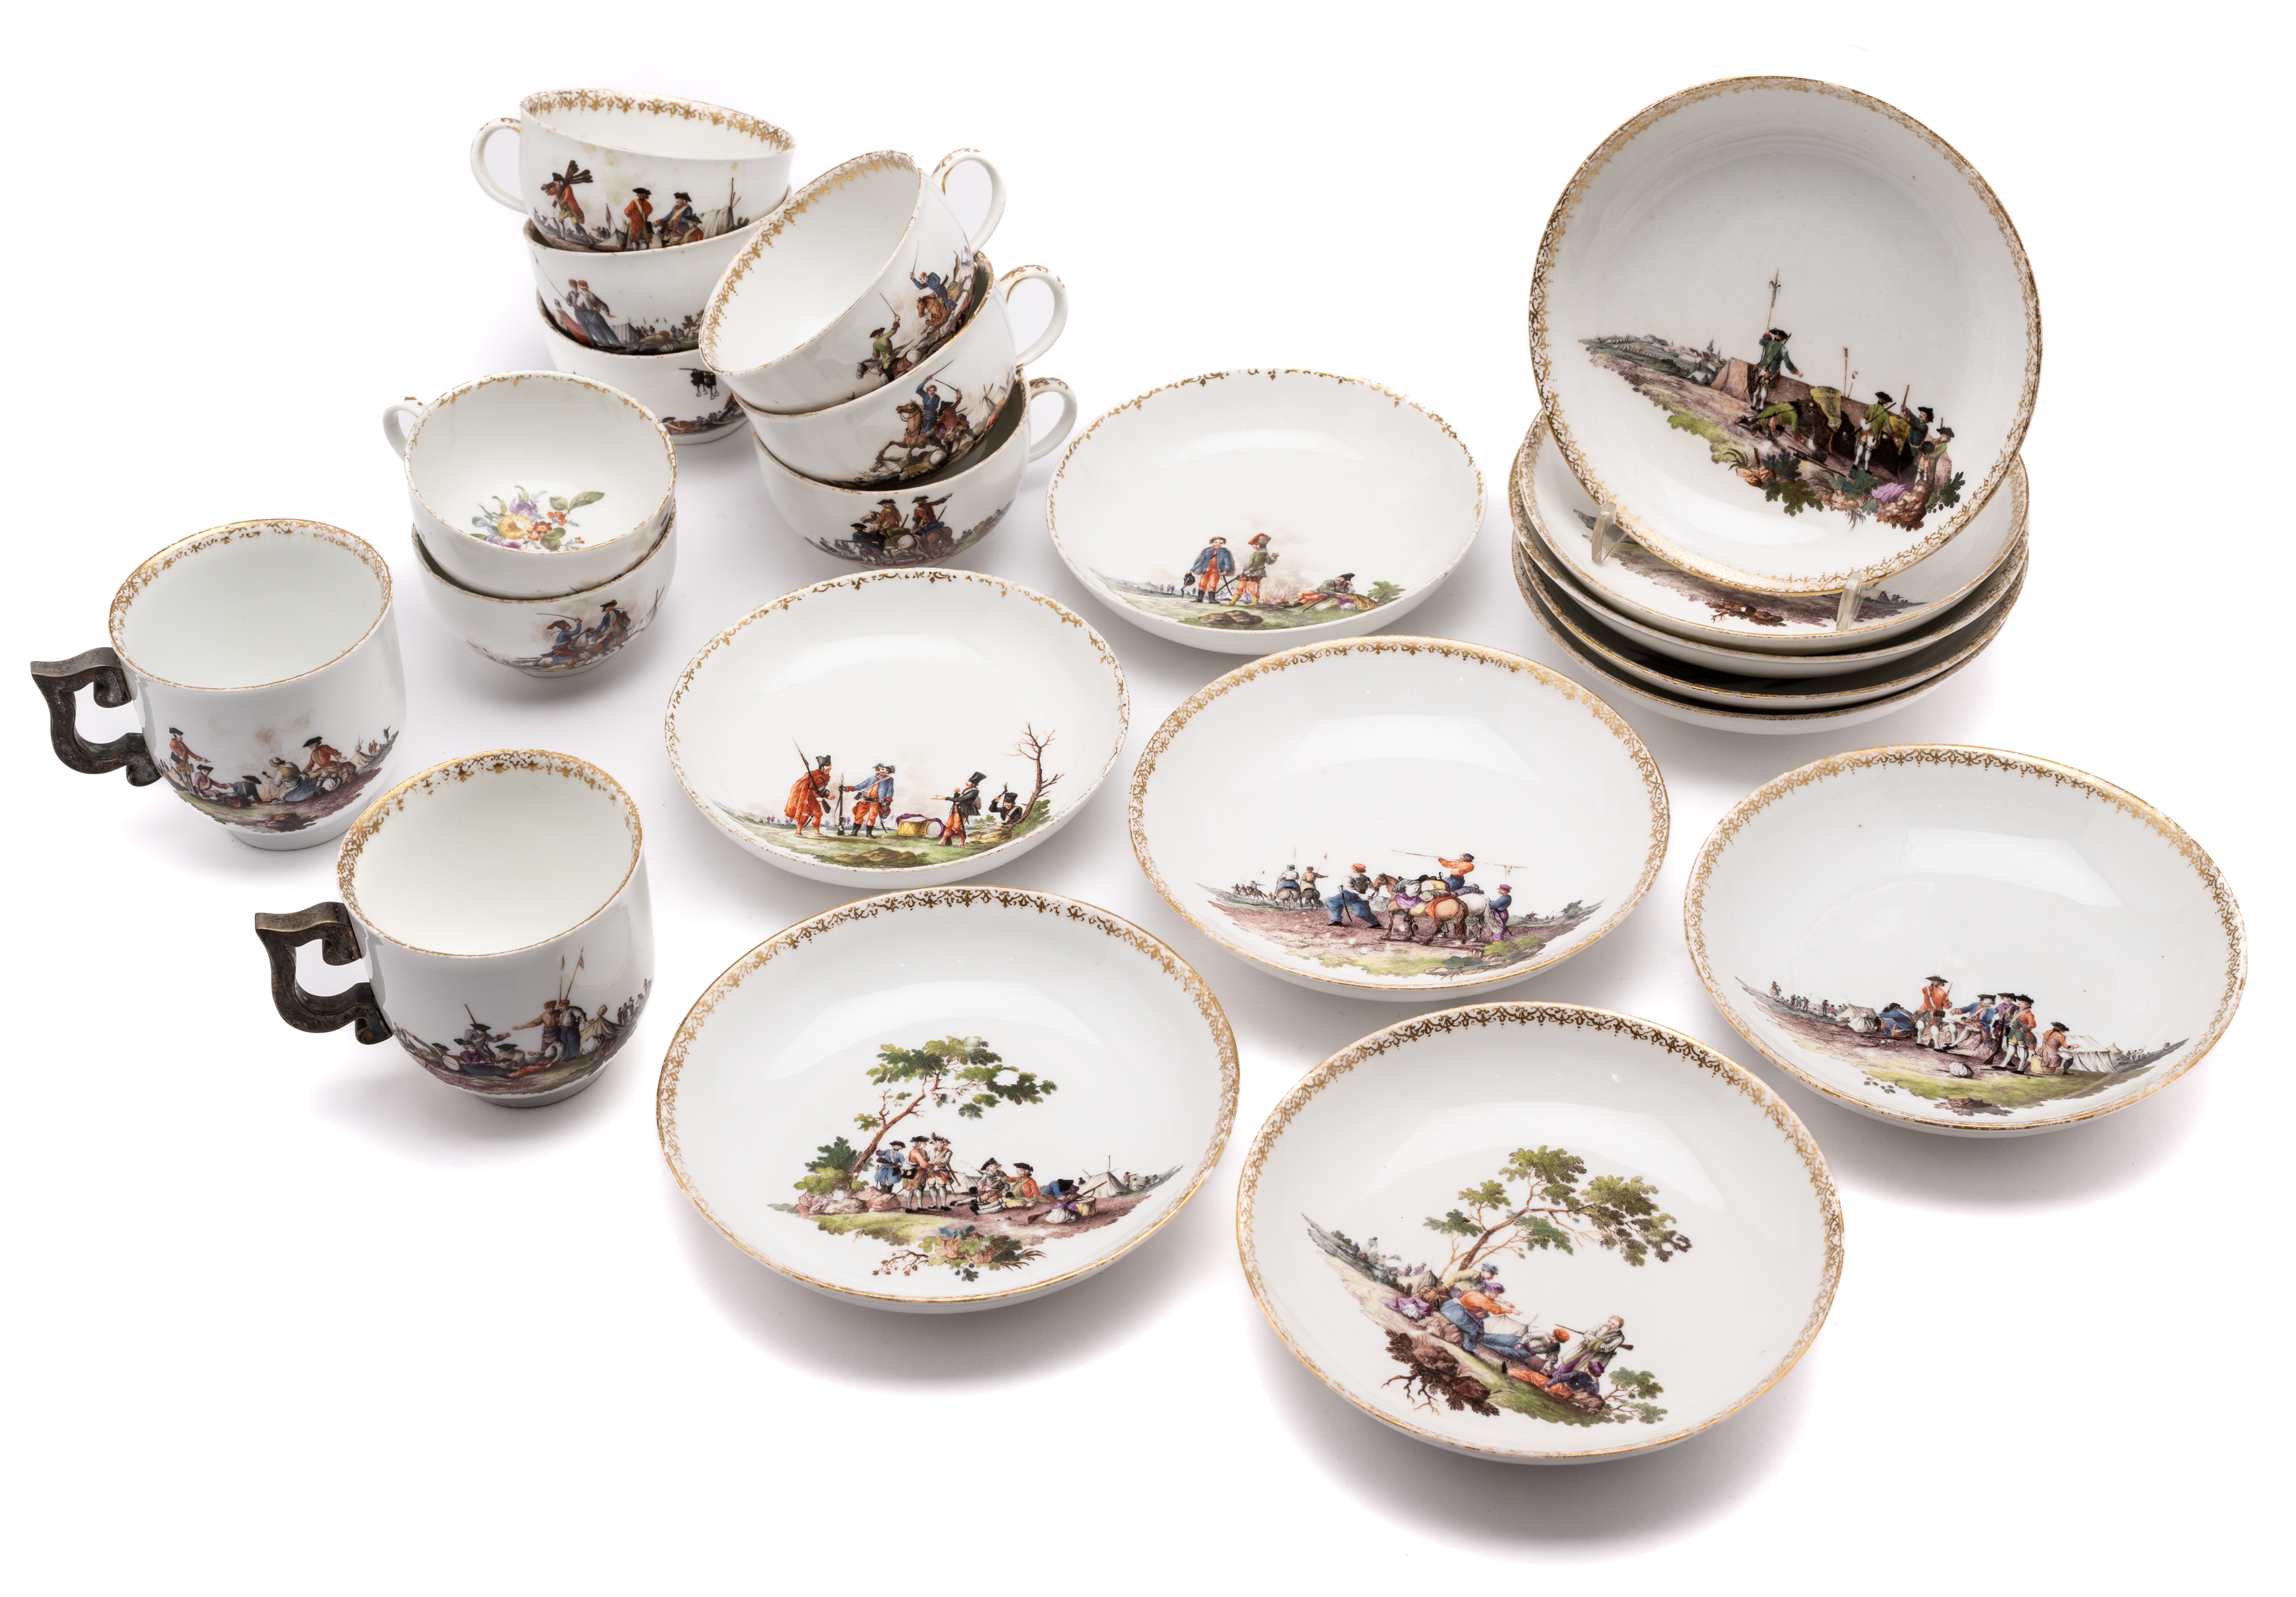 A MEISSEN 'BATAILLENMALEREI' GROUP OF TEN CUPS AND ELEVEN SAUCERS, MID 18TH CENTURY